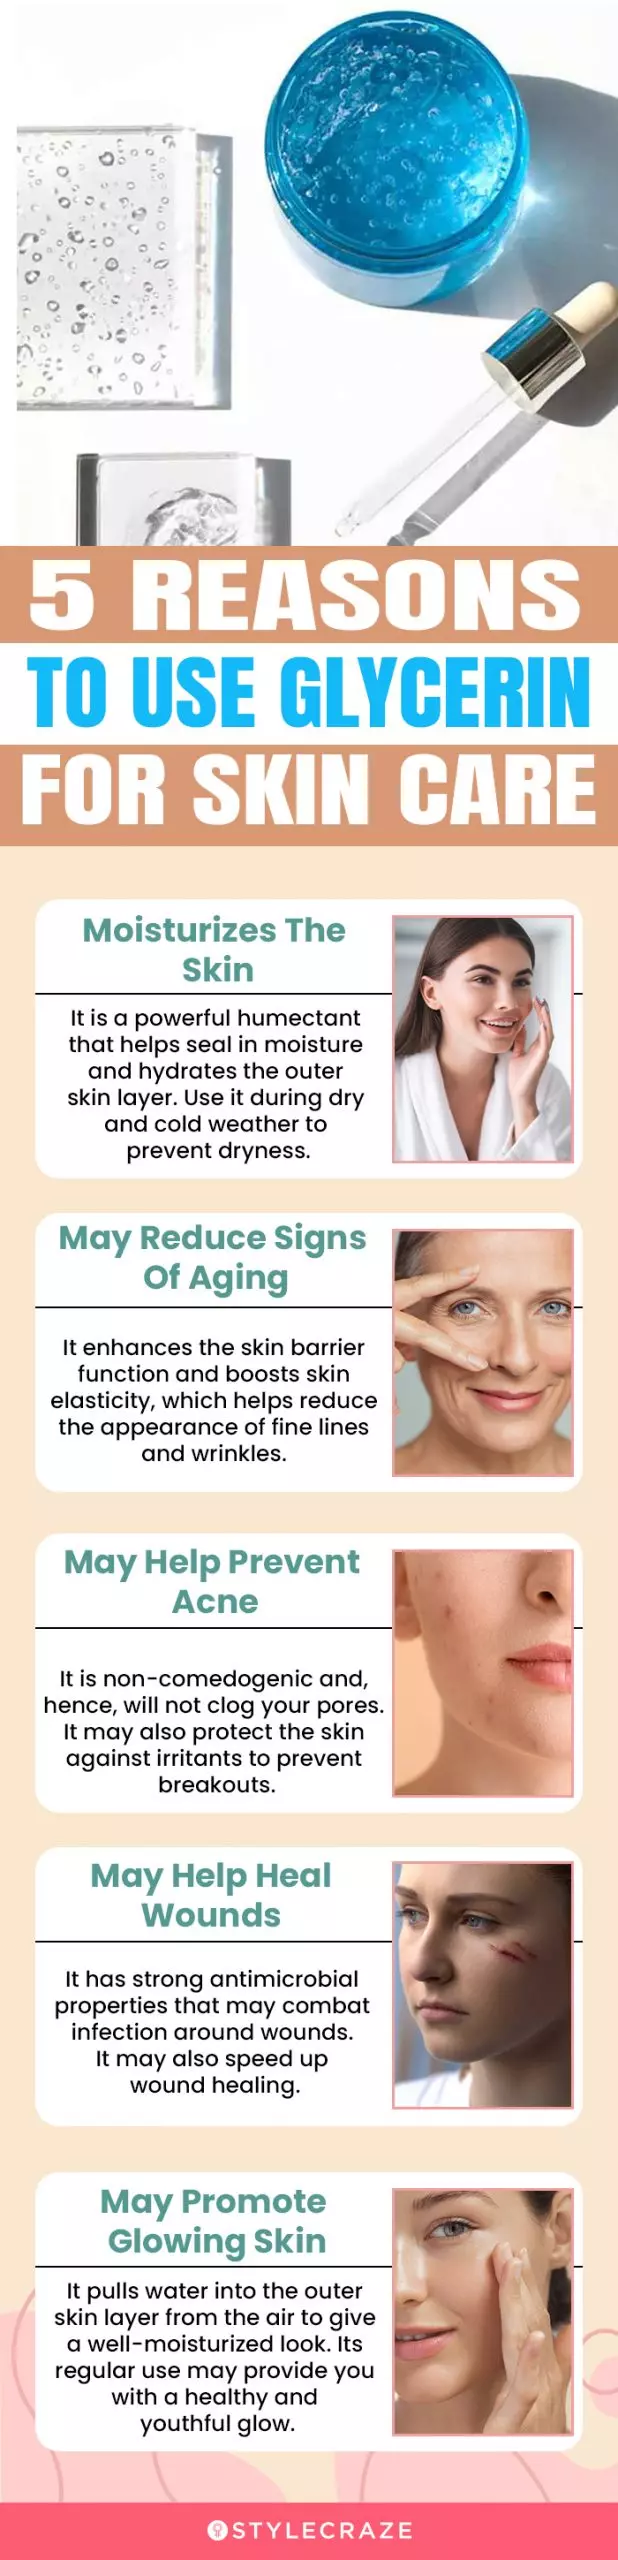 5 reasons for using glycerin for your skin (infographic)